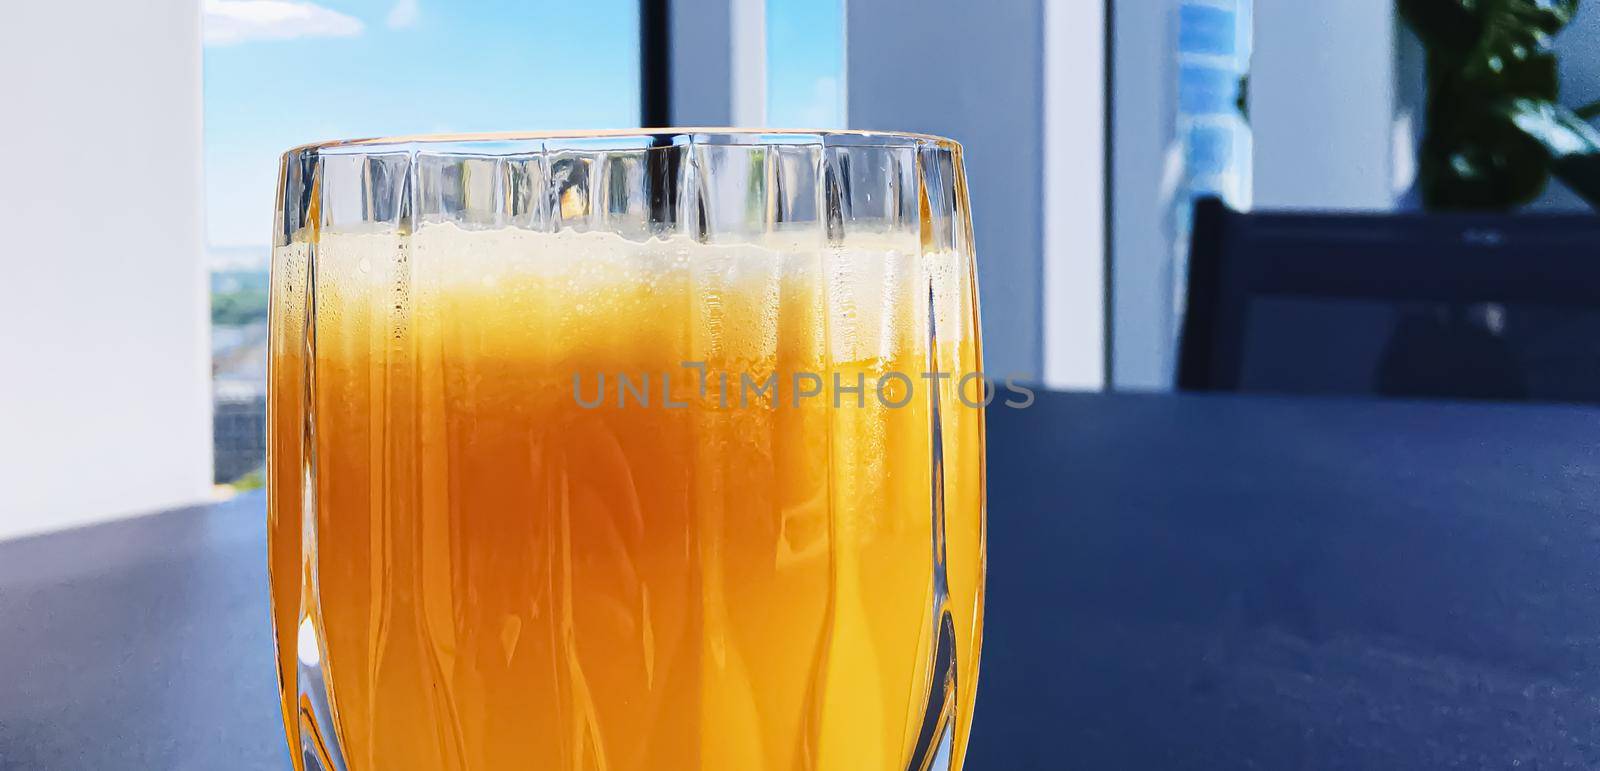 Healthy drink, fruit vitamins and beverage menu, fresh orange juice in luxury restaurant outdoors, food service and hotel breakfast concept by Anneleven